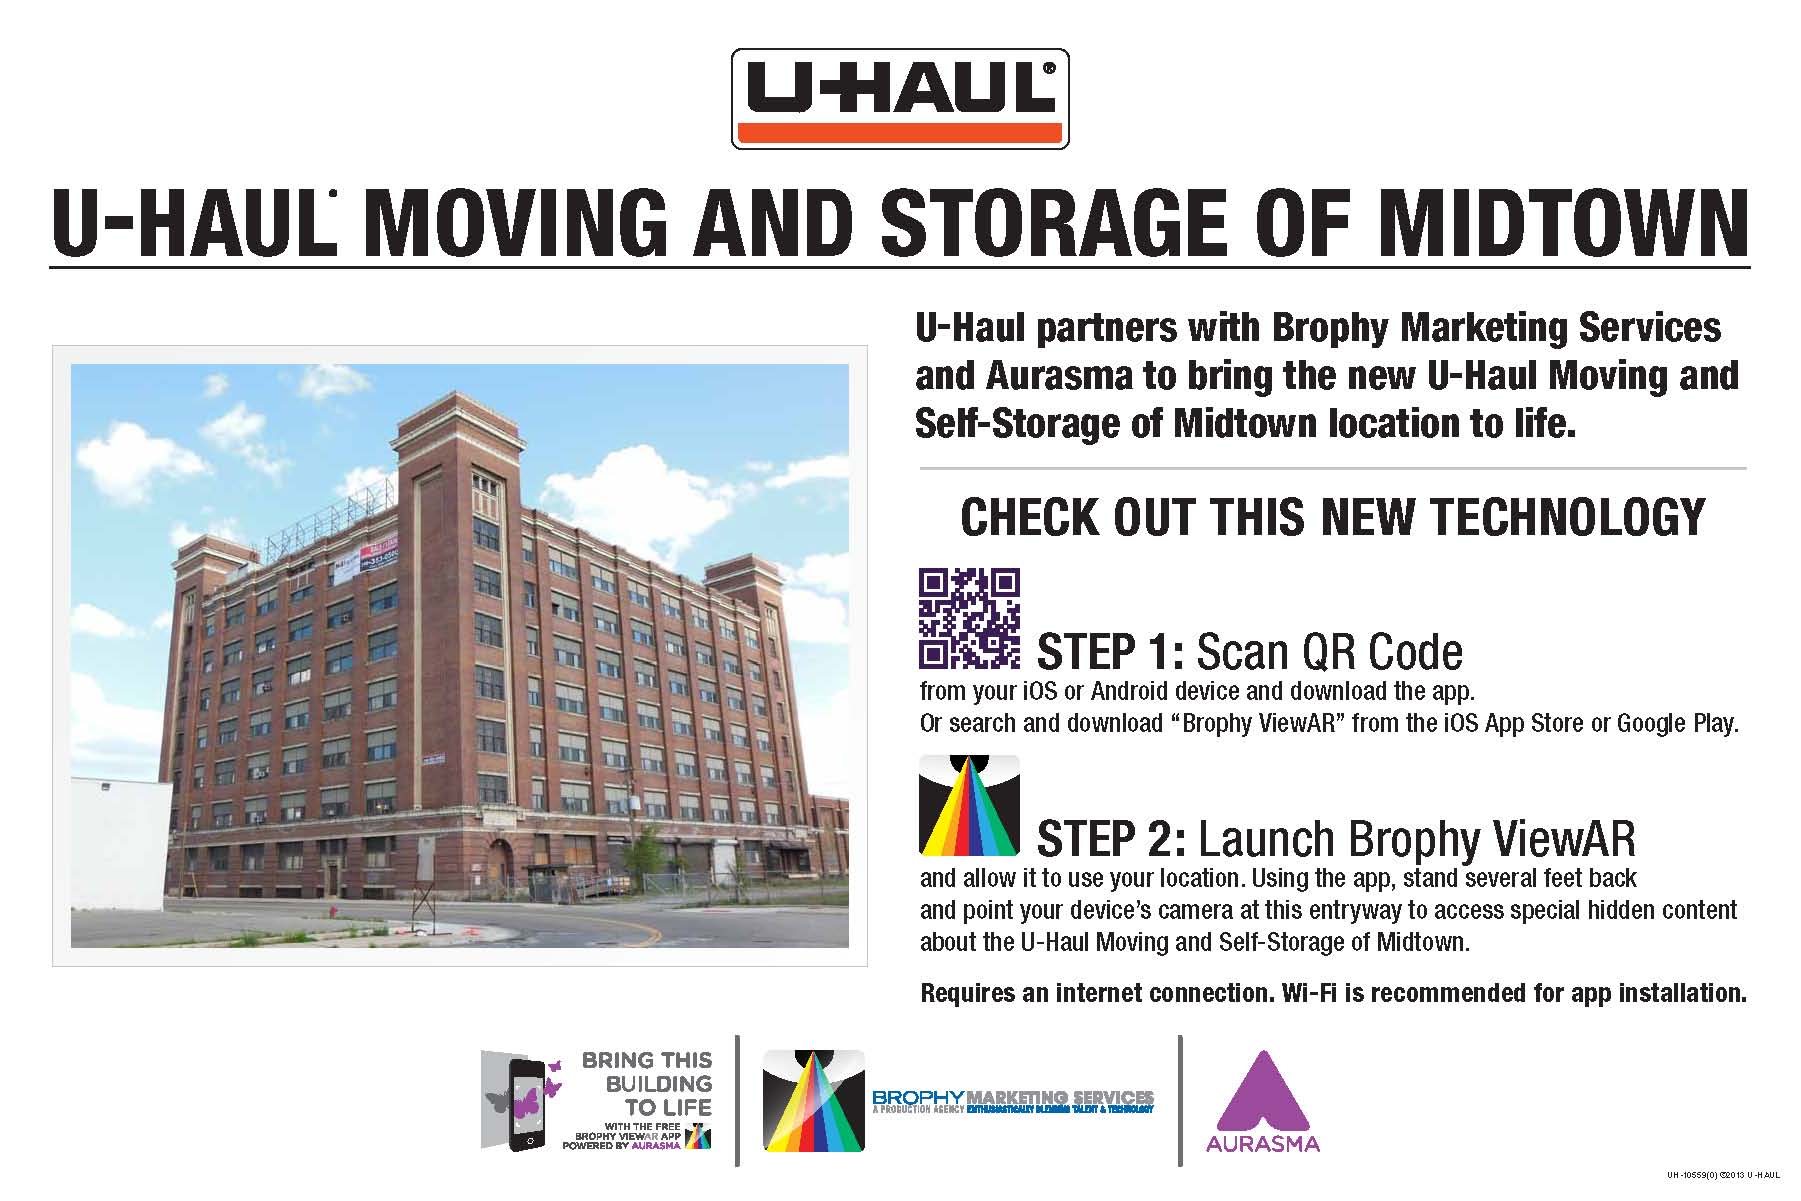 U-Haul partners with local Detroit business, Brophy Marketing Services